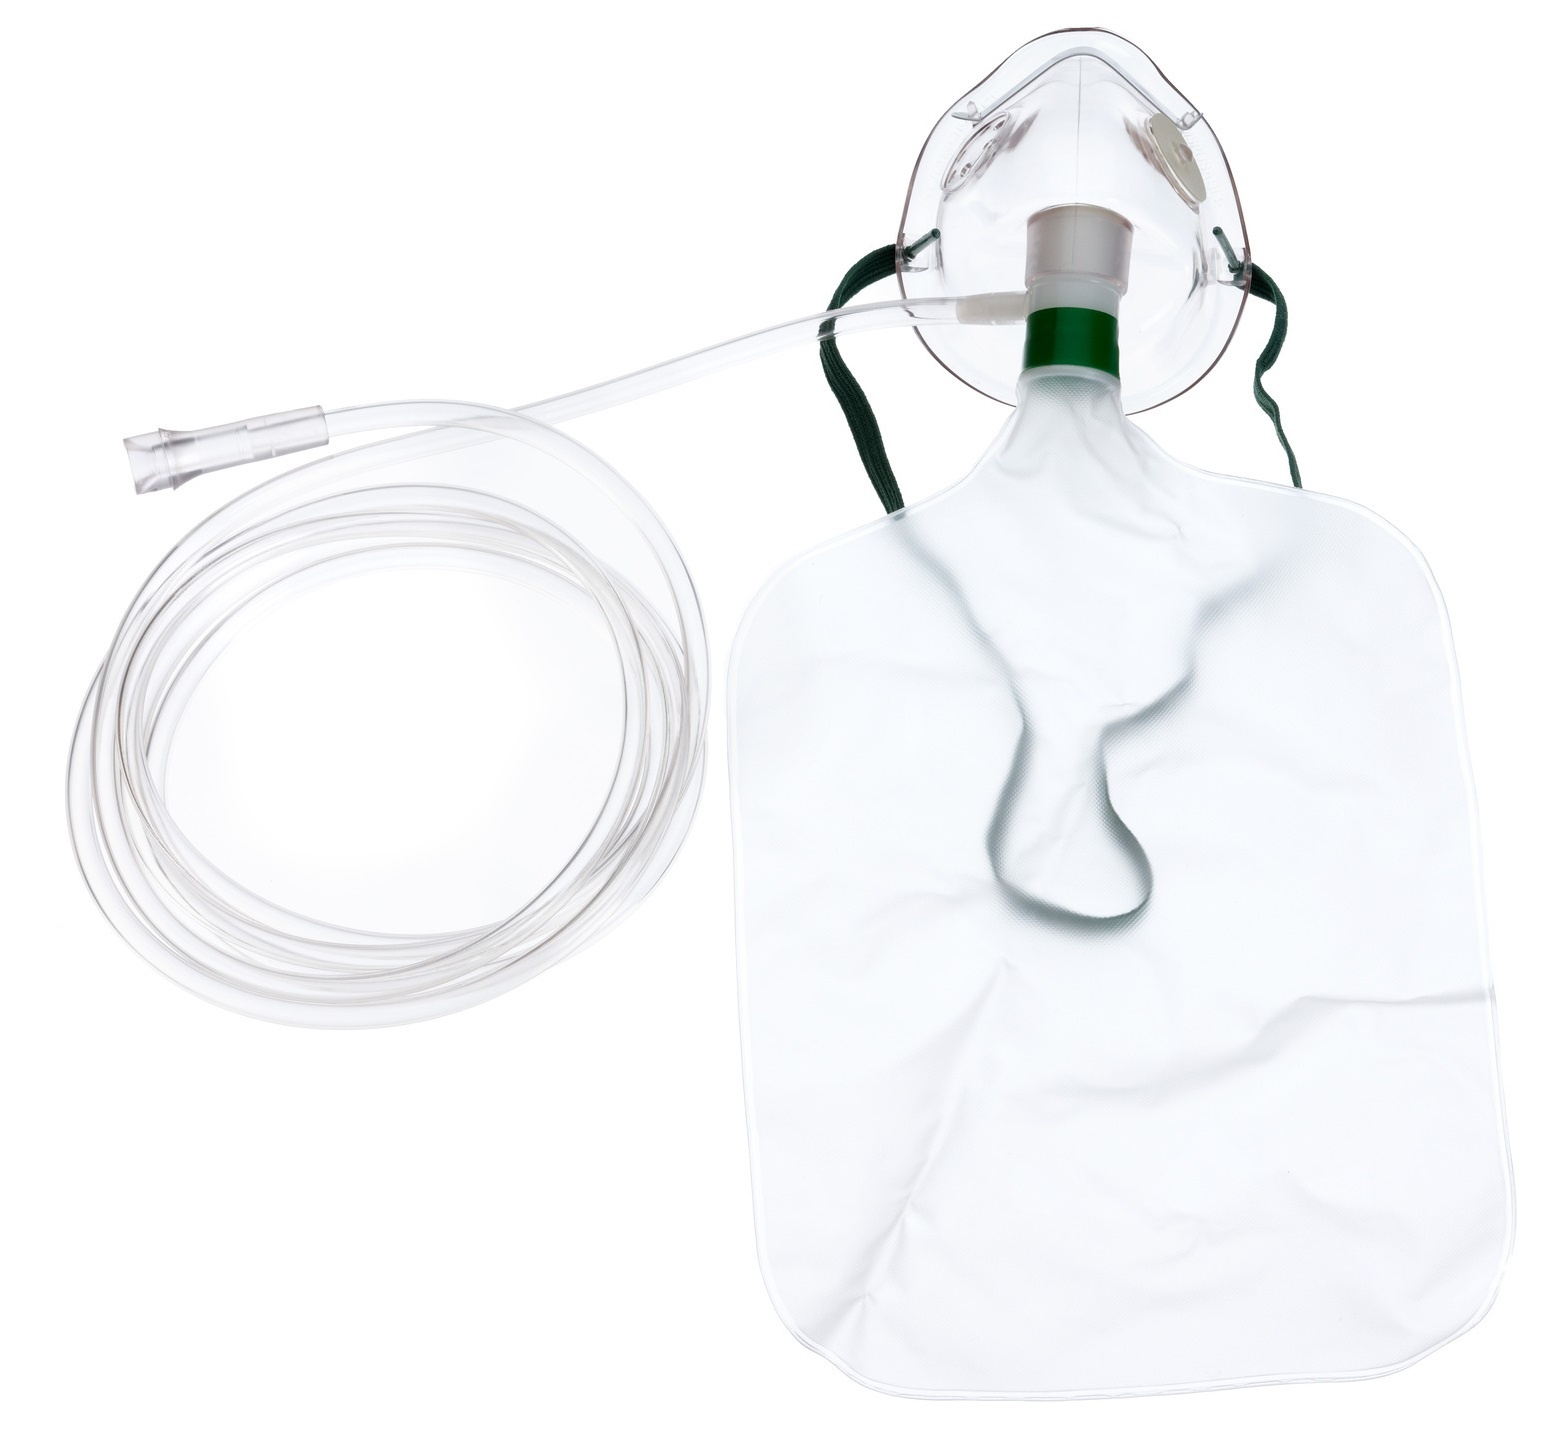 Hudson Mask Nonrebreathing with Safety Vent, Reservoir Bag & 7ft Tubing - Paediatric